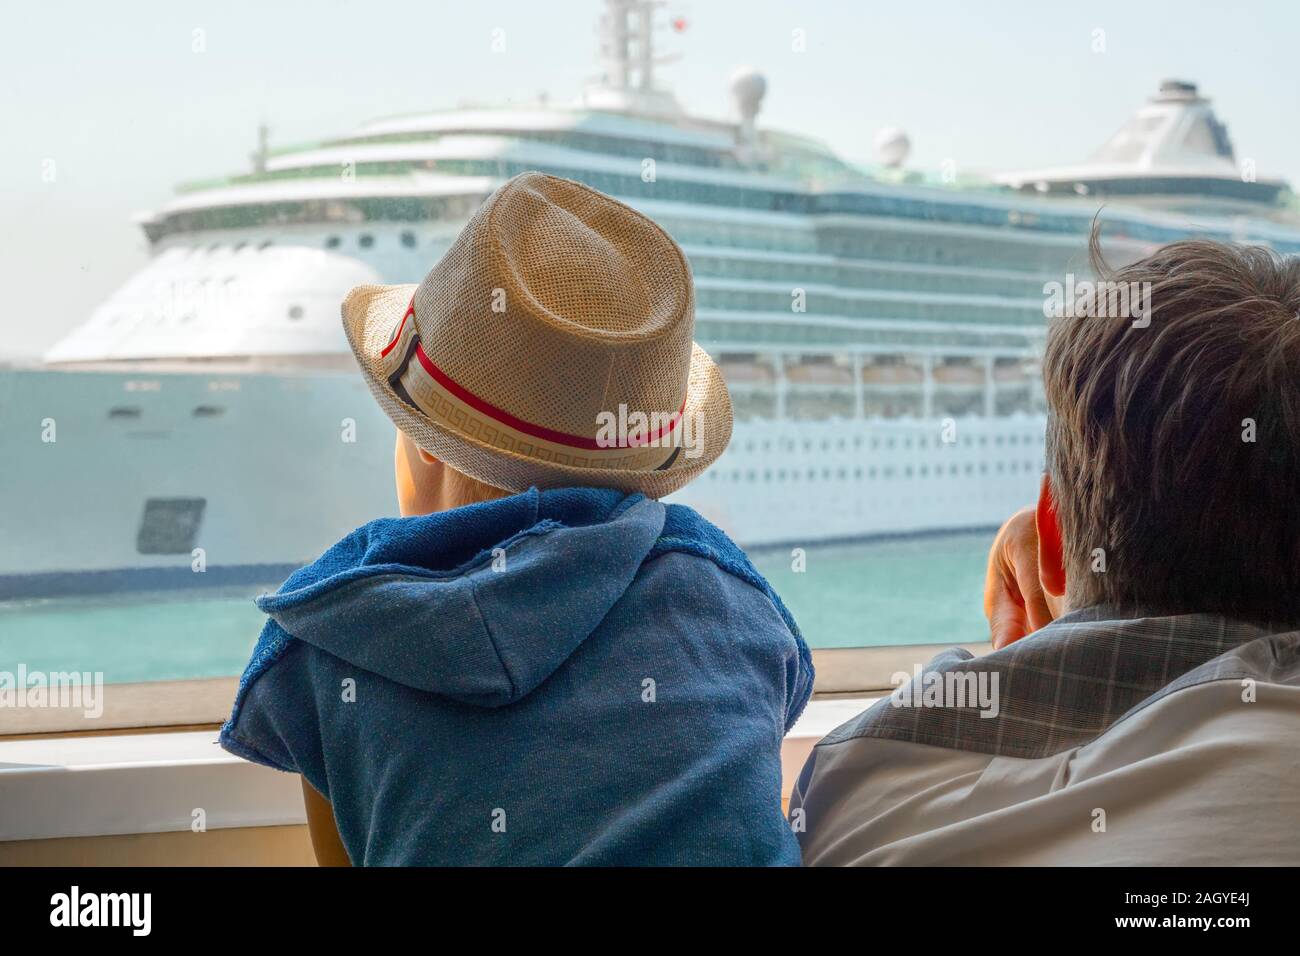 Father and son travel in Europe, Greece. Happy family time. Happy father and son enjoying the fascinating view on liner, ship. Reflections on traveling. Spending time with family. Christmas time Stock Photo